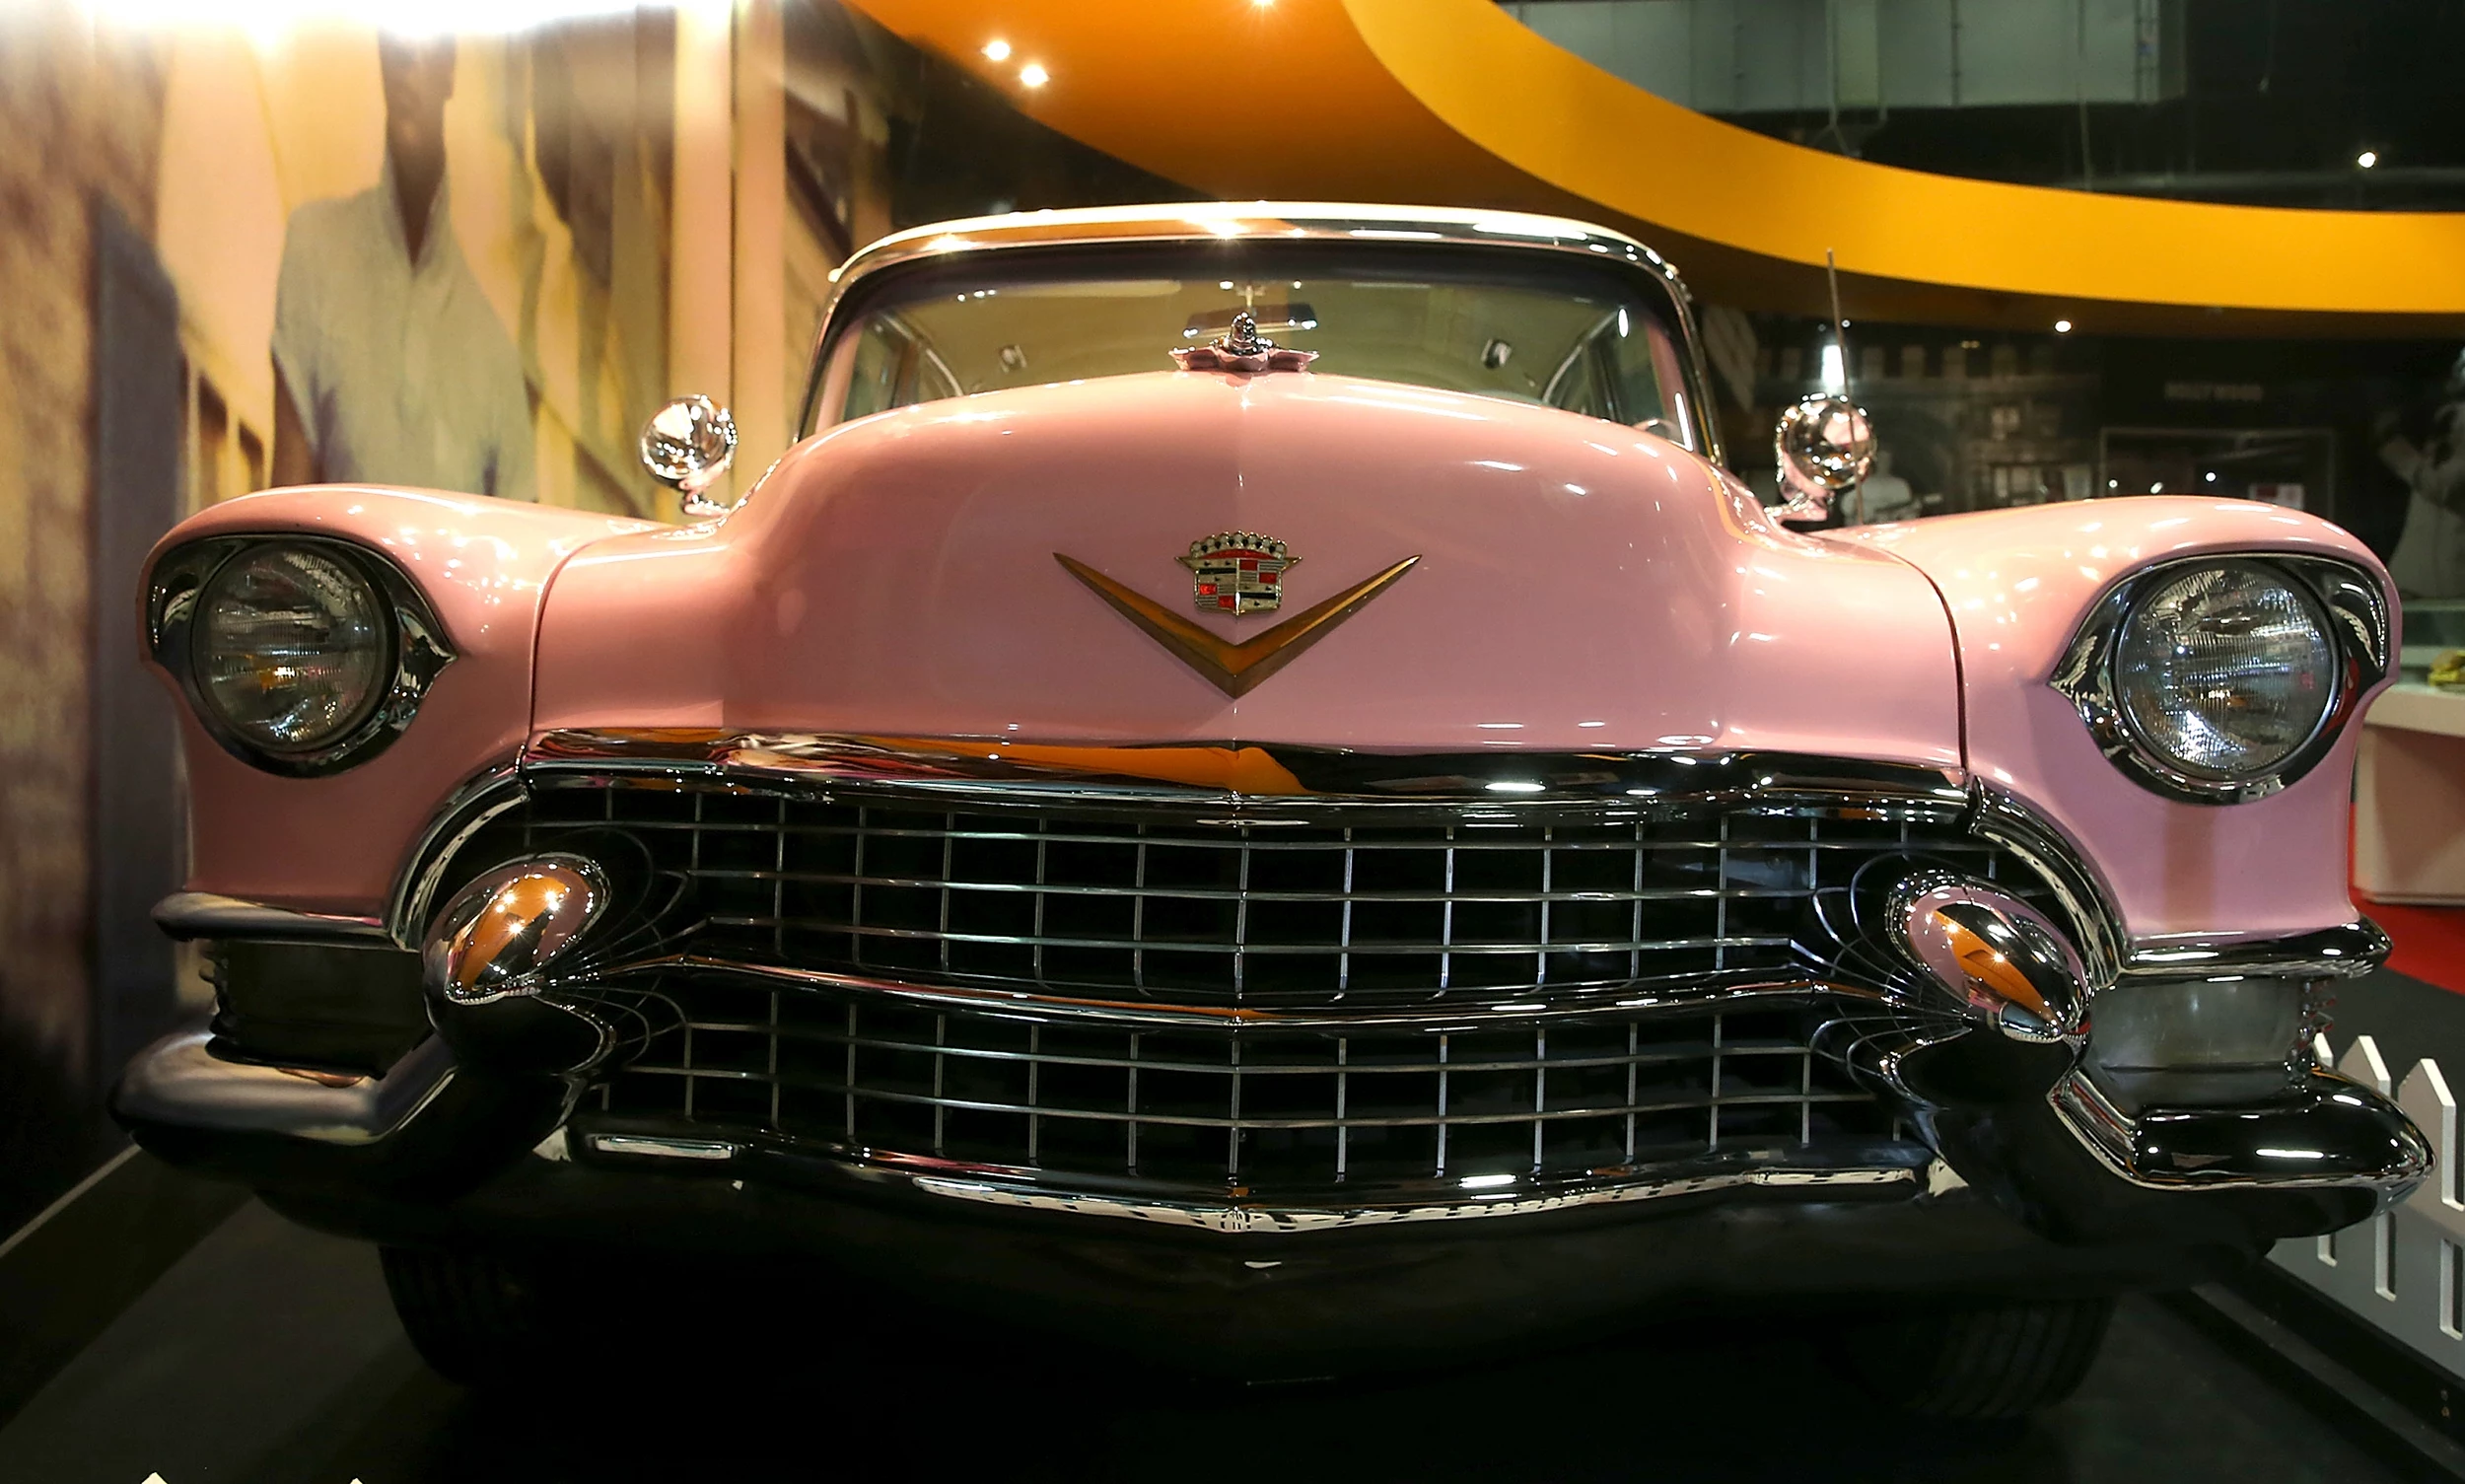 Pink Cadillac: The most famous car ever made (Opinion)